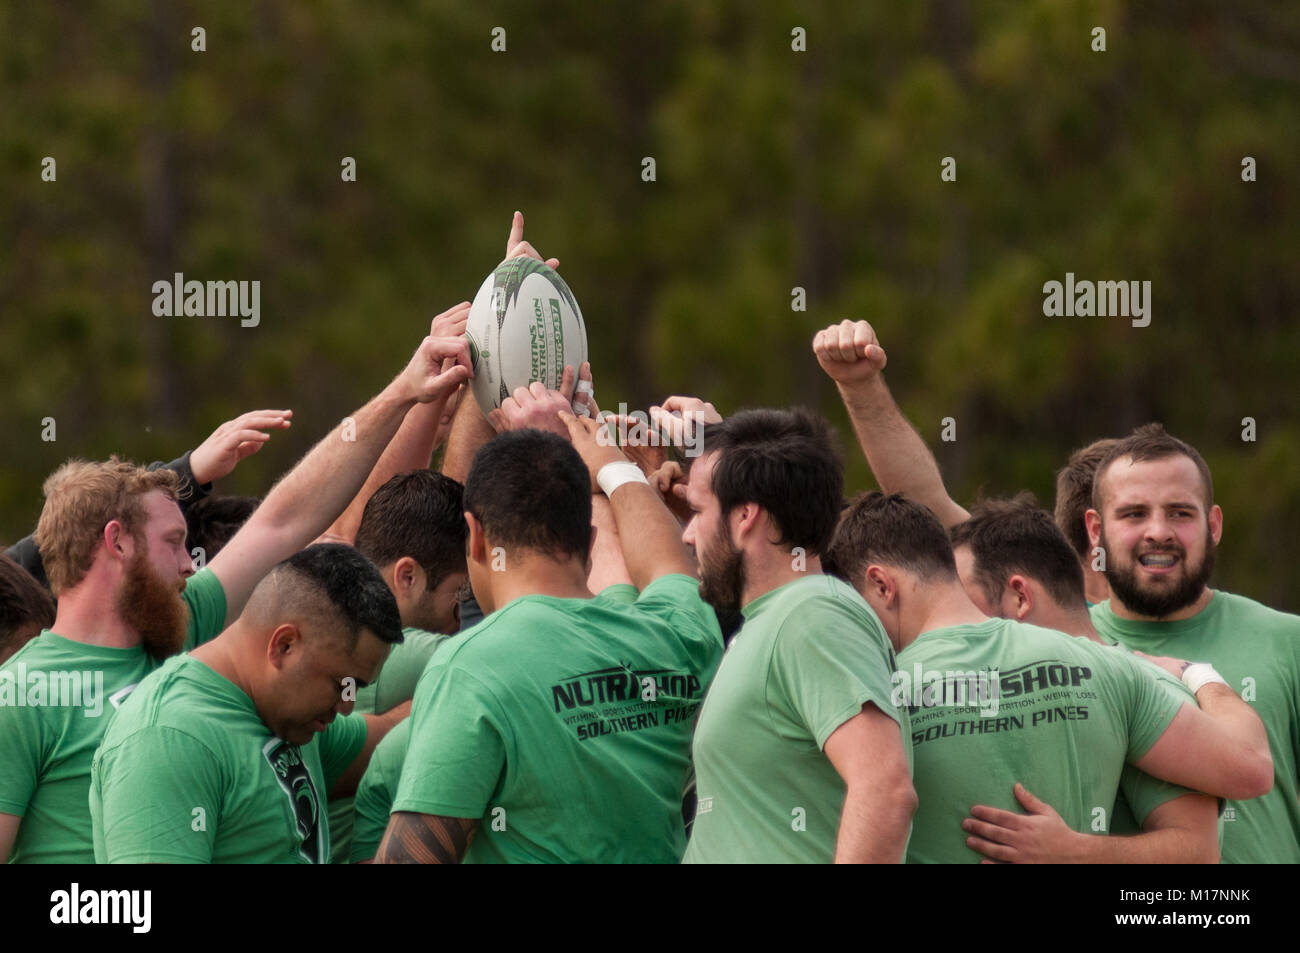 Southern Pines, N.C, USA. 27th Jan, 2018. January 27, 2018 - Southern Pines, N.C., USA - The Southern Pines Big Cones break their team huddle before their non-conference rugby match against the Clemson Tigers Rugby Club, at the National Athletic Village in Southern Pines, N.C. Southern Pines defeated Clemson, 34-29 in the tune-up match before Southern Pines starts the second half of Carolina Rugby Union matrix play next week. Credit: Timothy L. Hale/ZUMA Wire/Alamy Live News Stock Photo